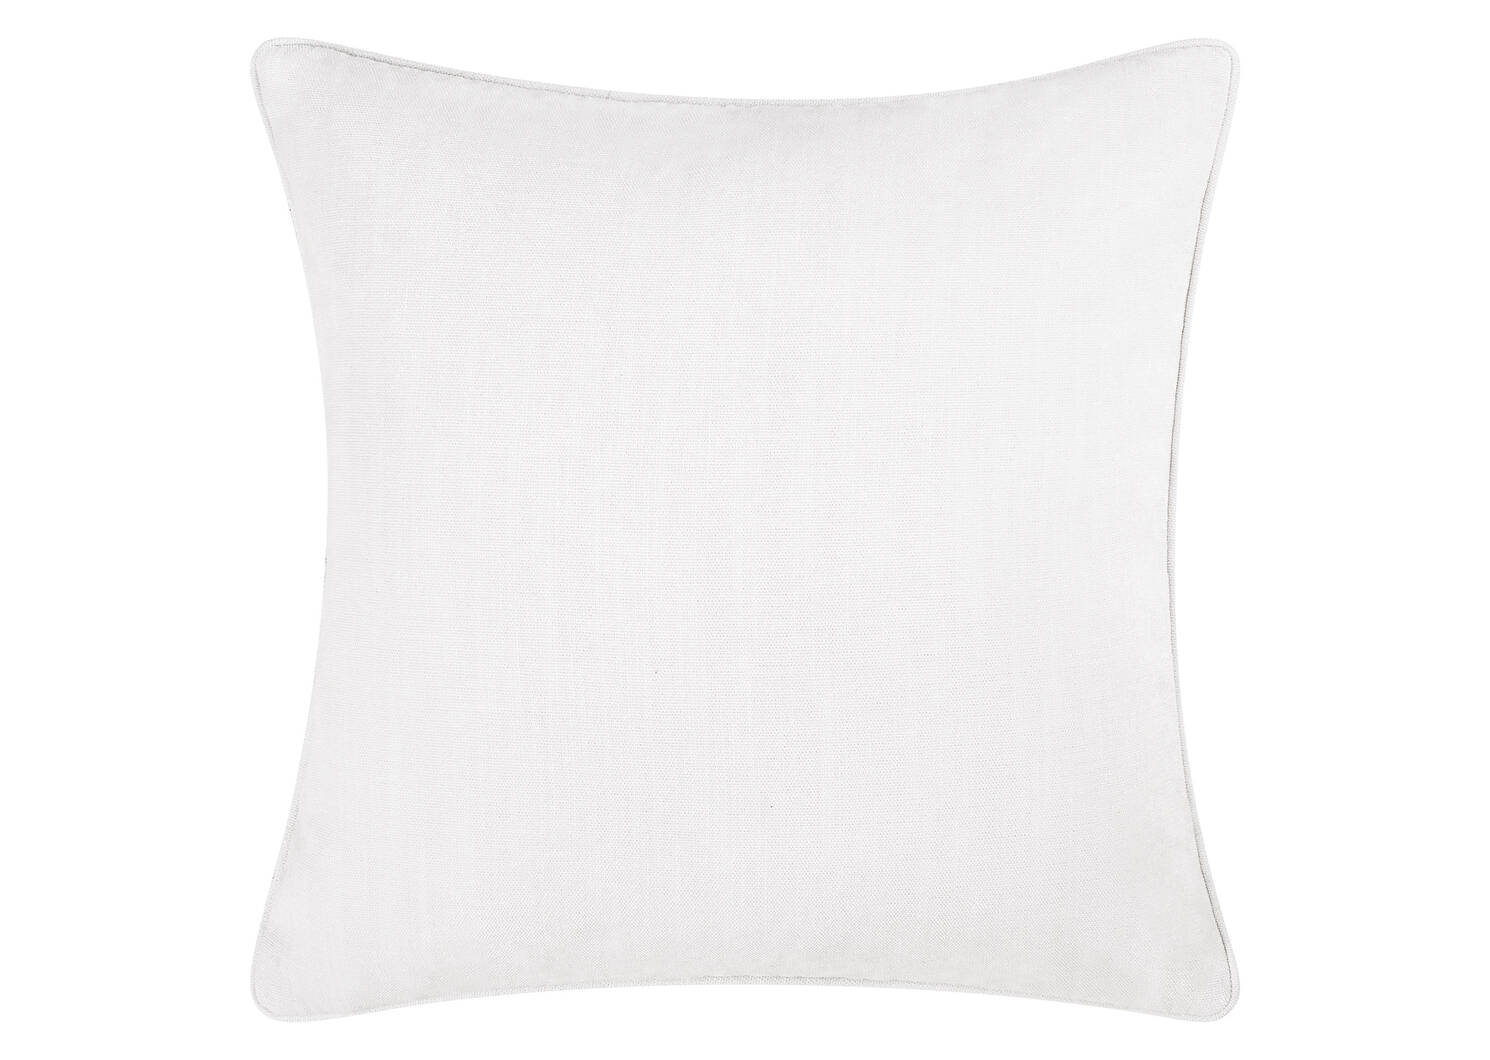 Bailey Pillow 20x20 Ivory